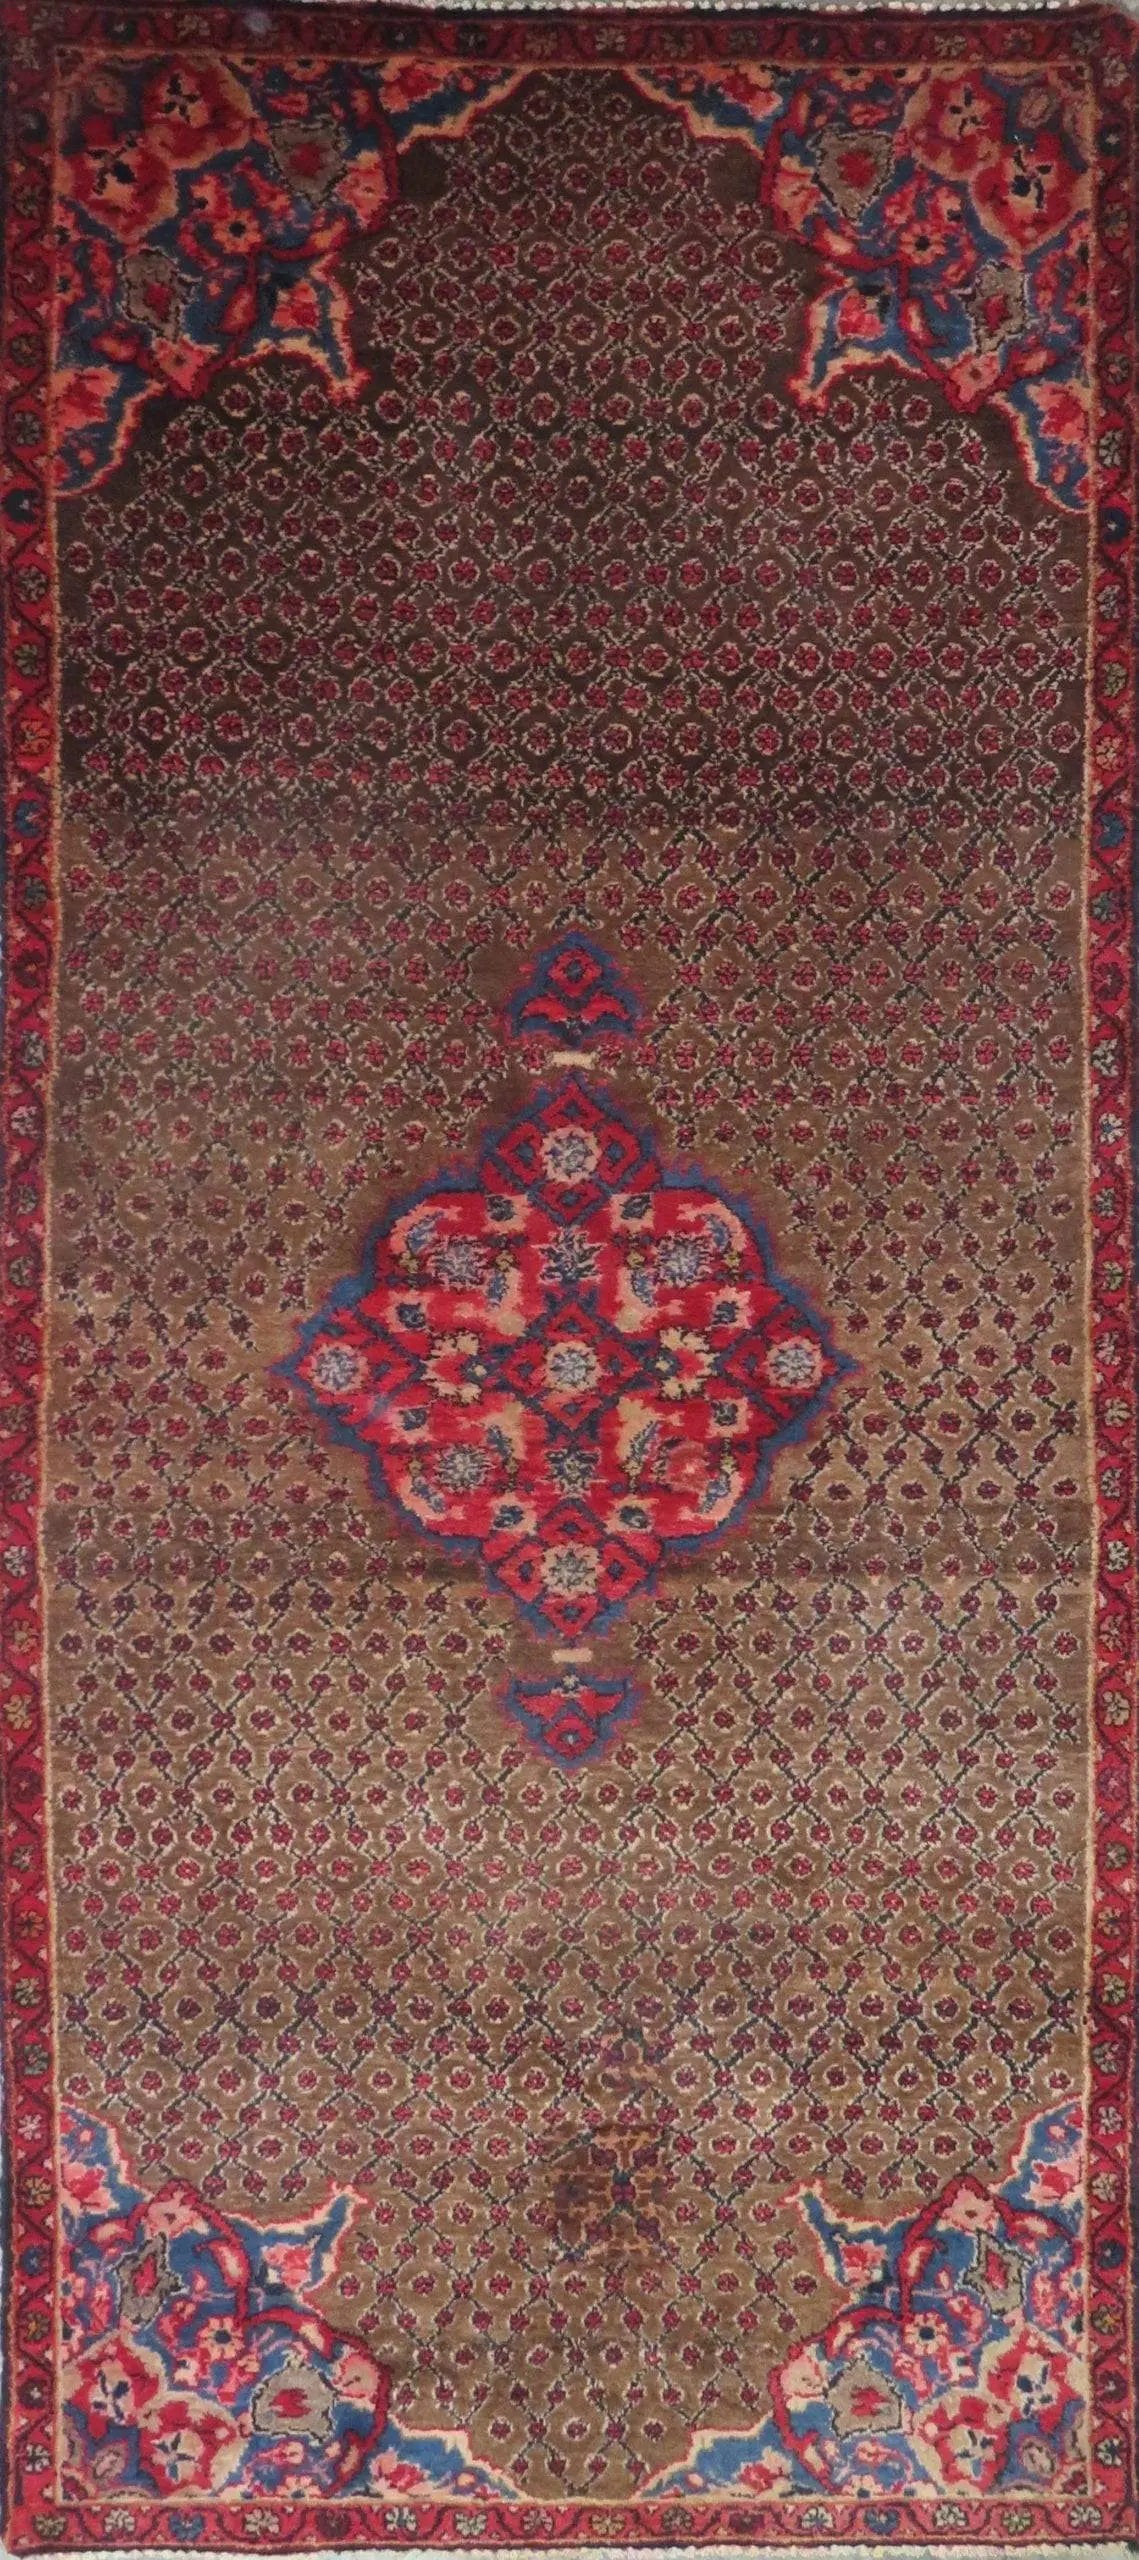 Hand-Knotted Vintage Rug 5'8" x 4'9"